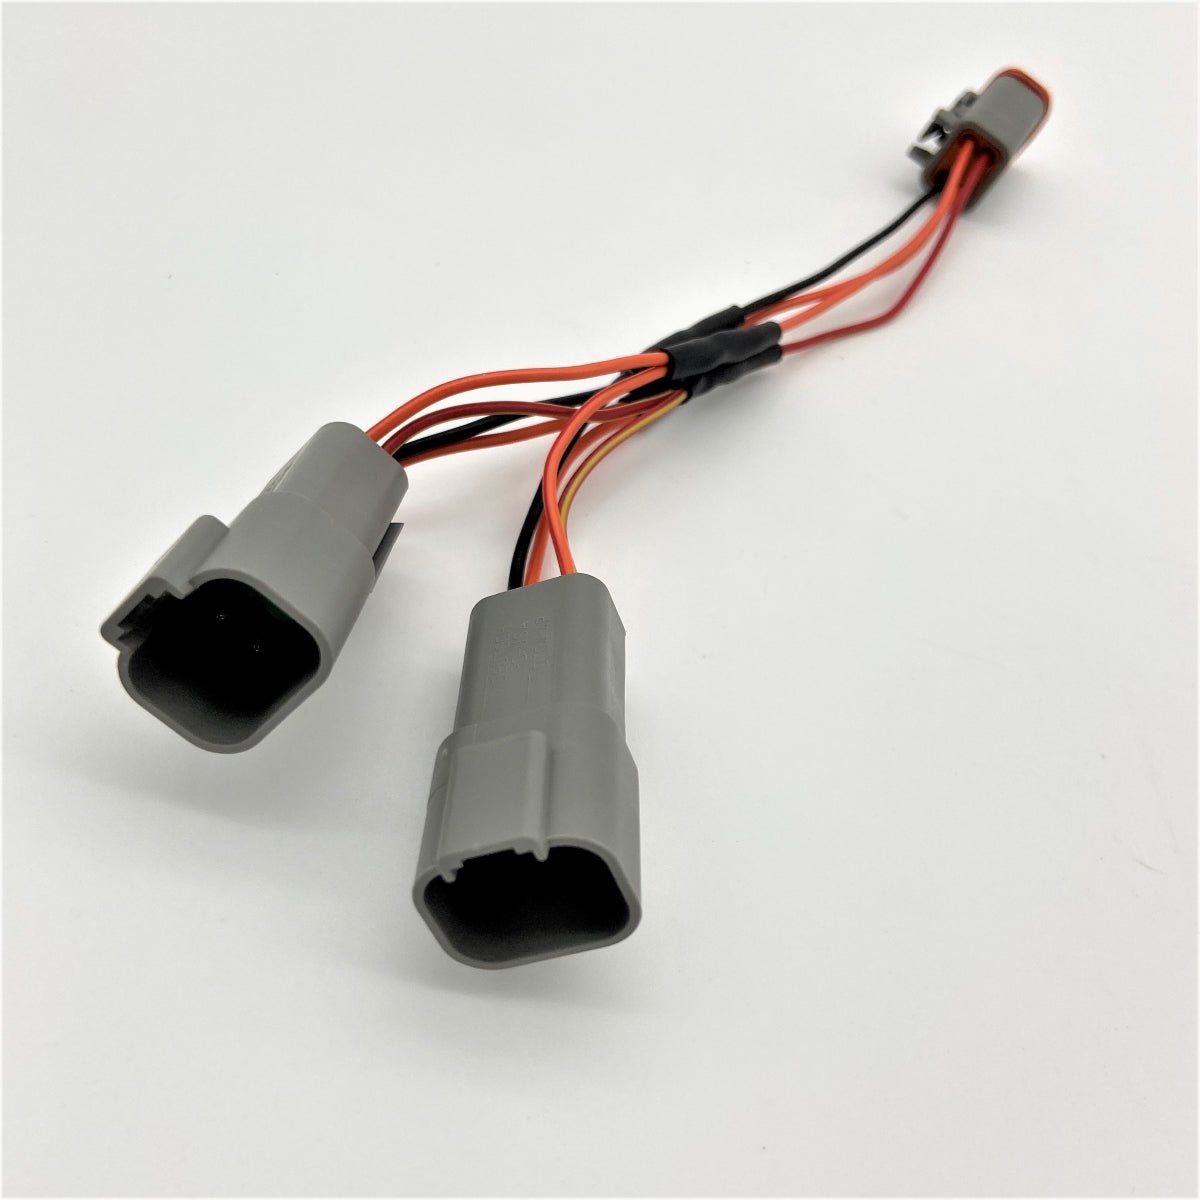 Switched Circuit Adapter (4-way Y-Adapter) for Harley - Blood Eagle Speed Shop